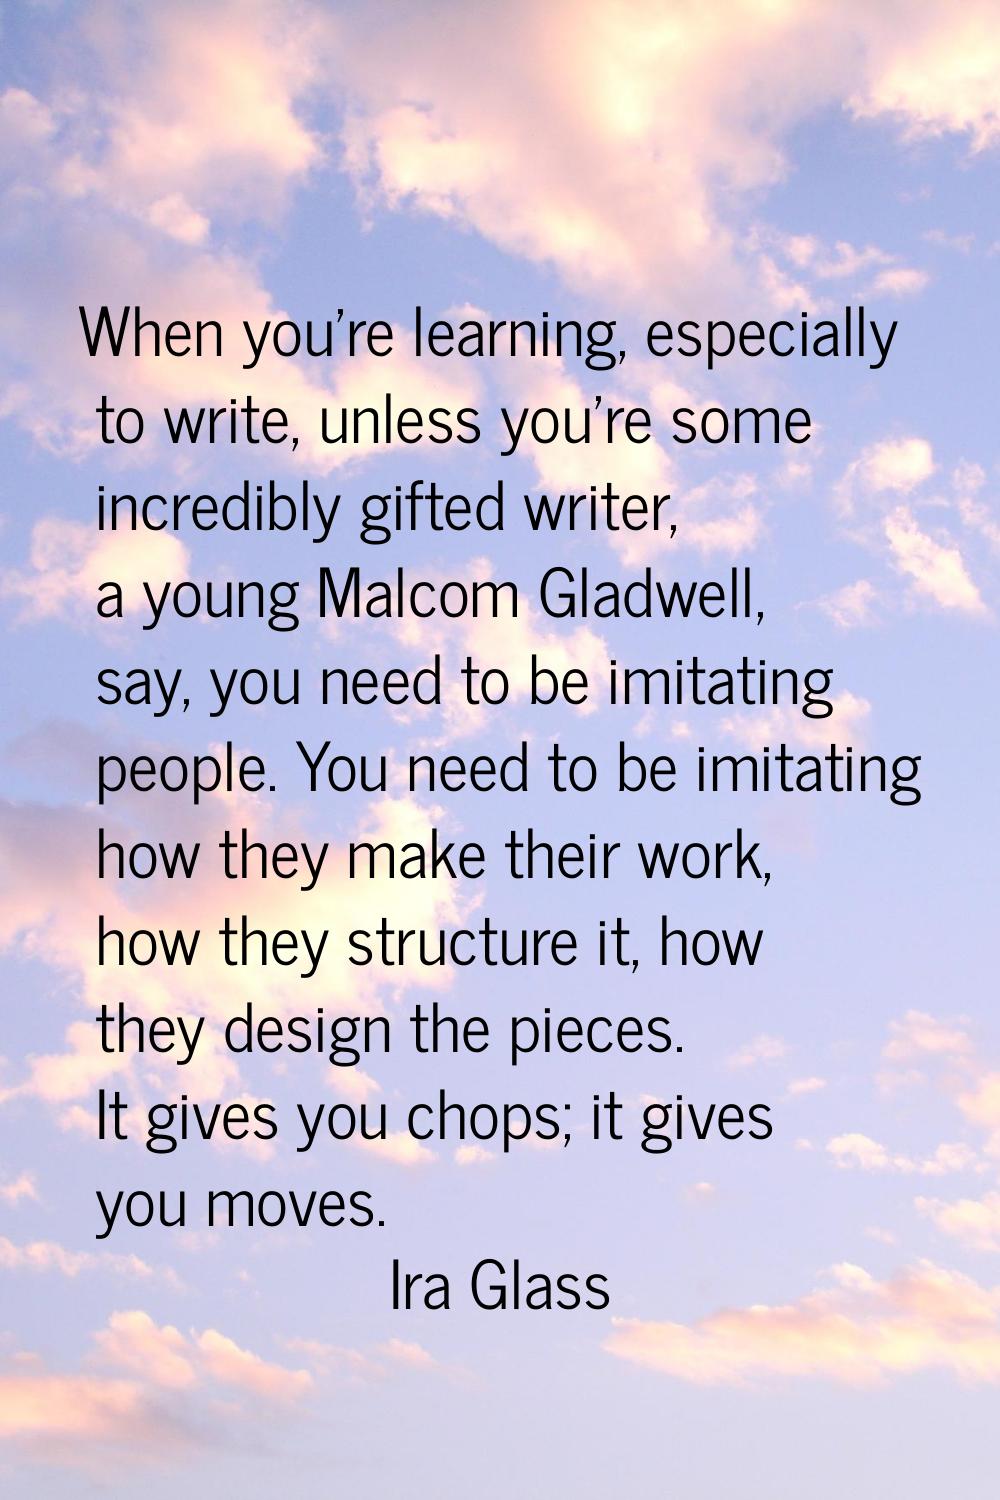 When you're learning, especially to write, unless you're some incredibly gifted writer, a young Mal